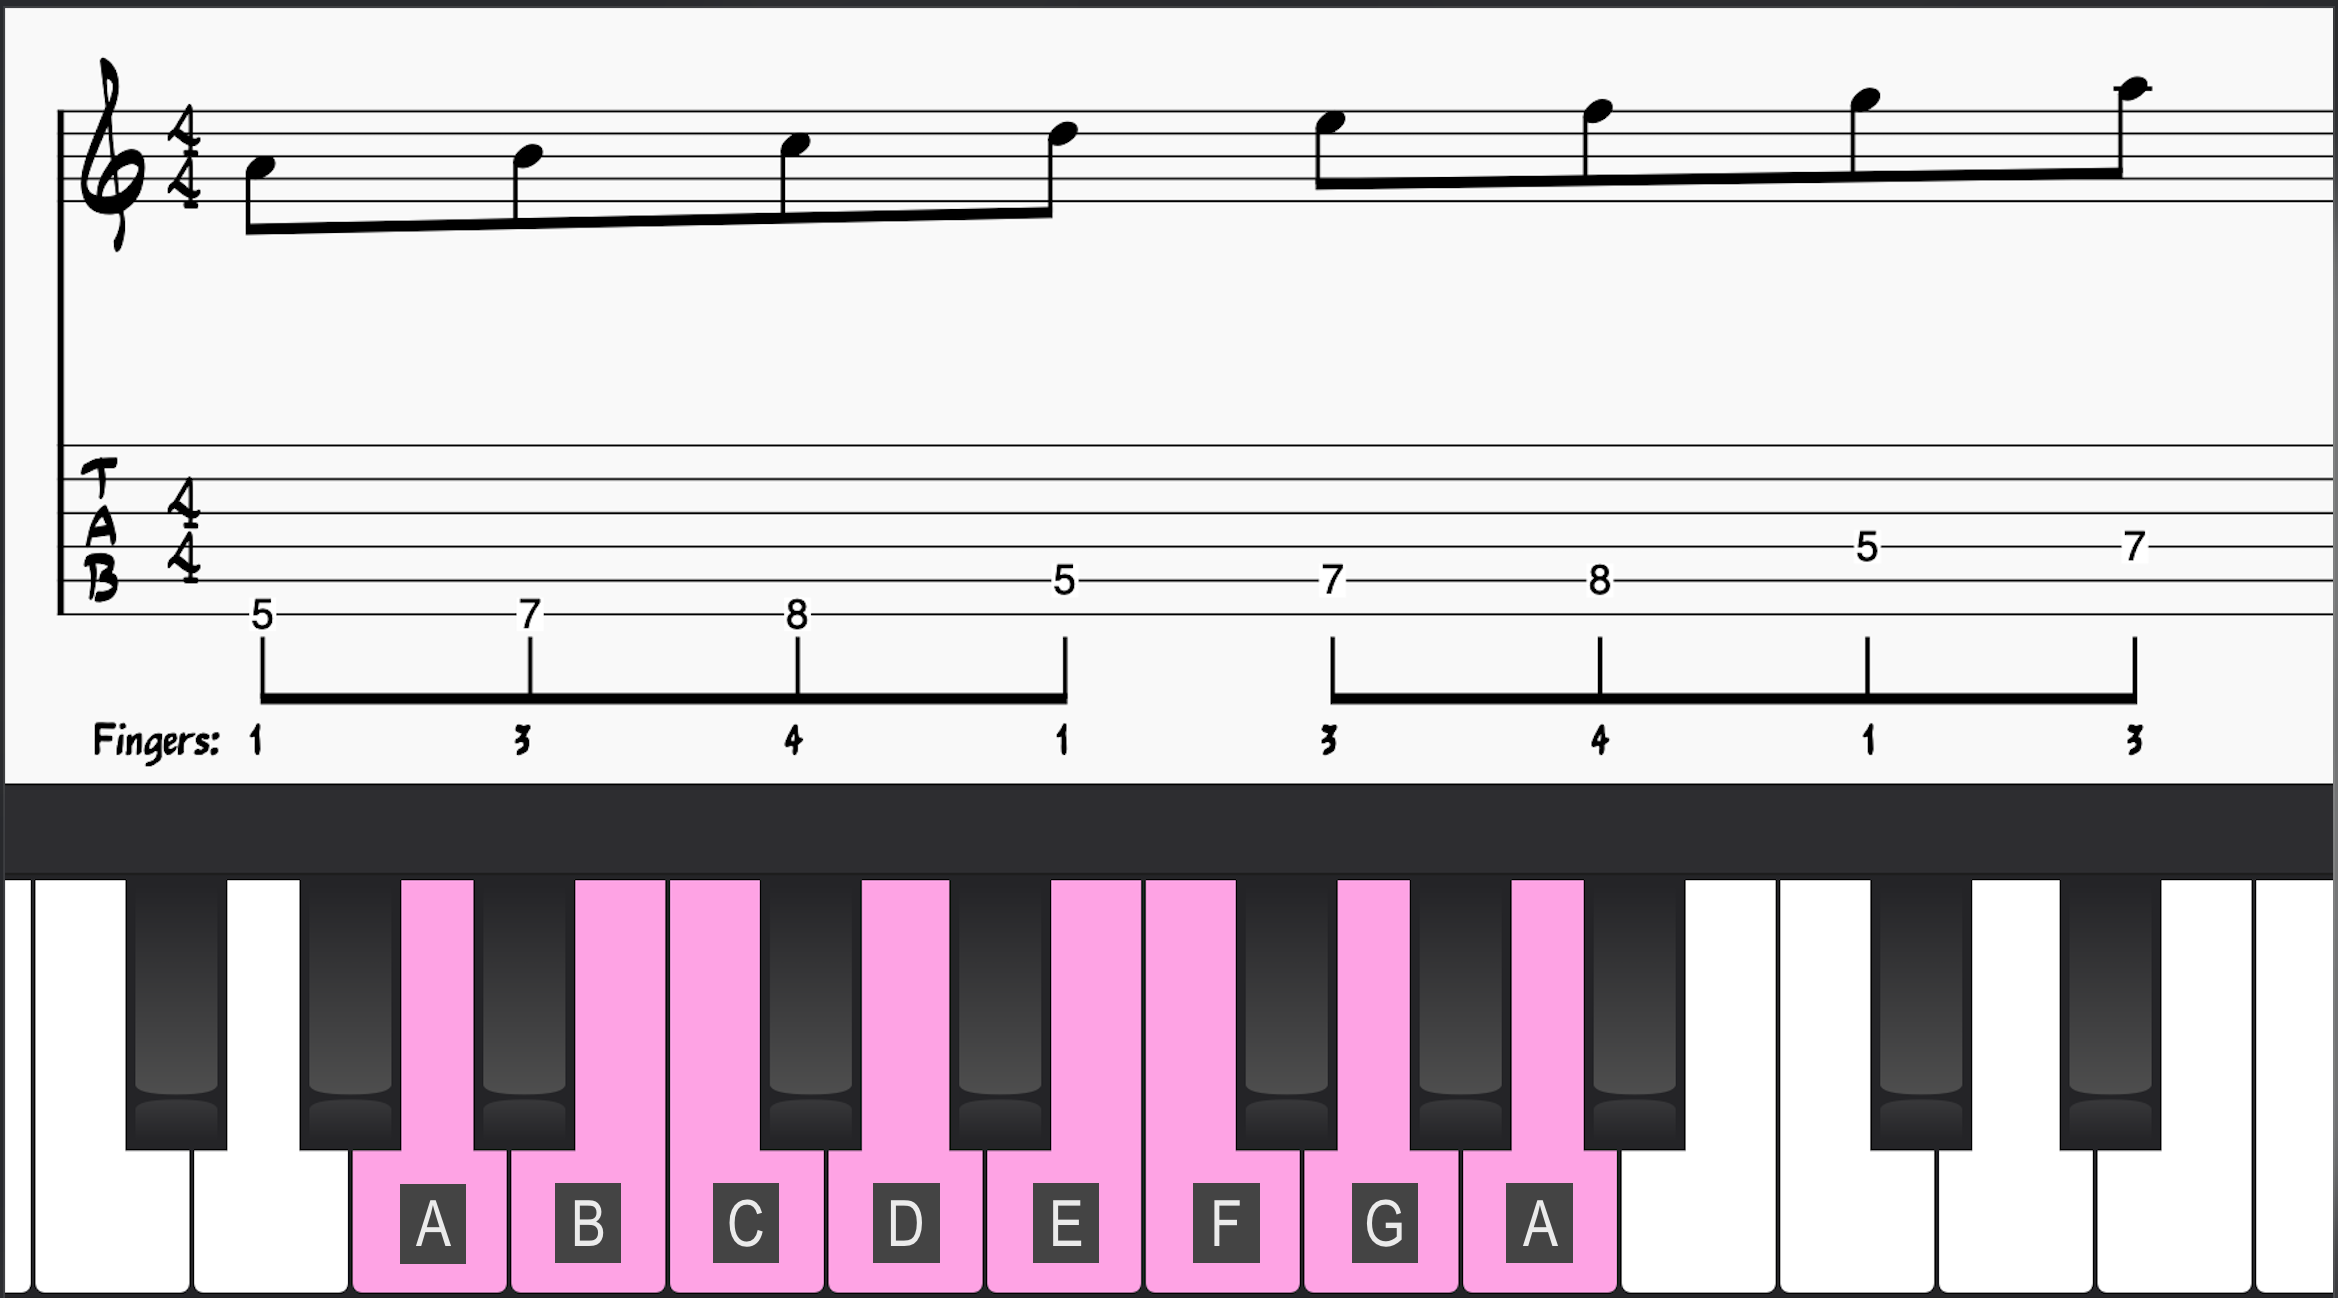 Minor Scales: A natural minor scale on piano and guitar; minor key